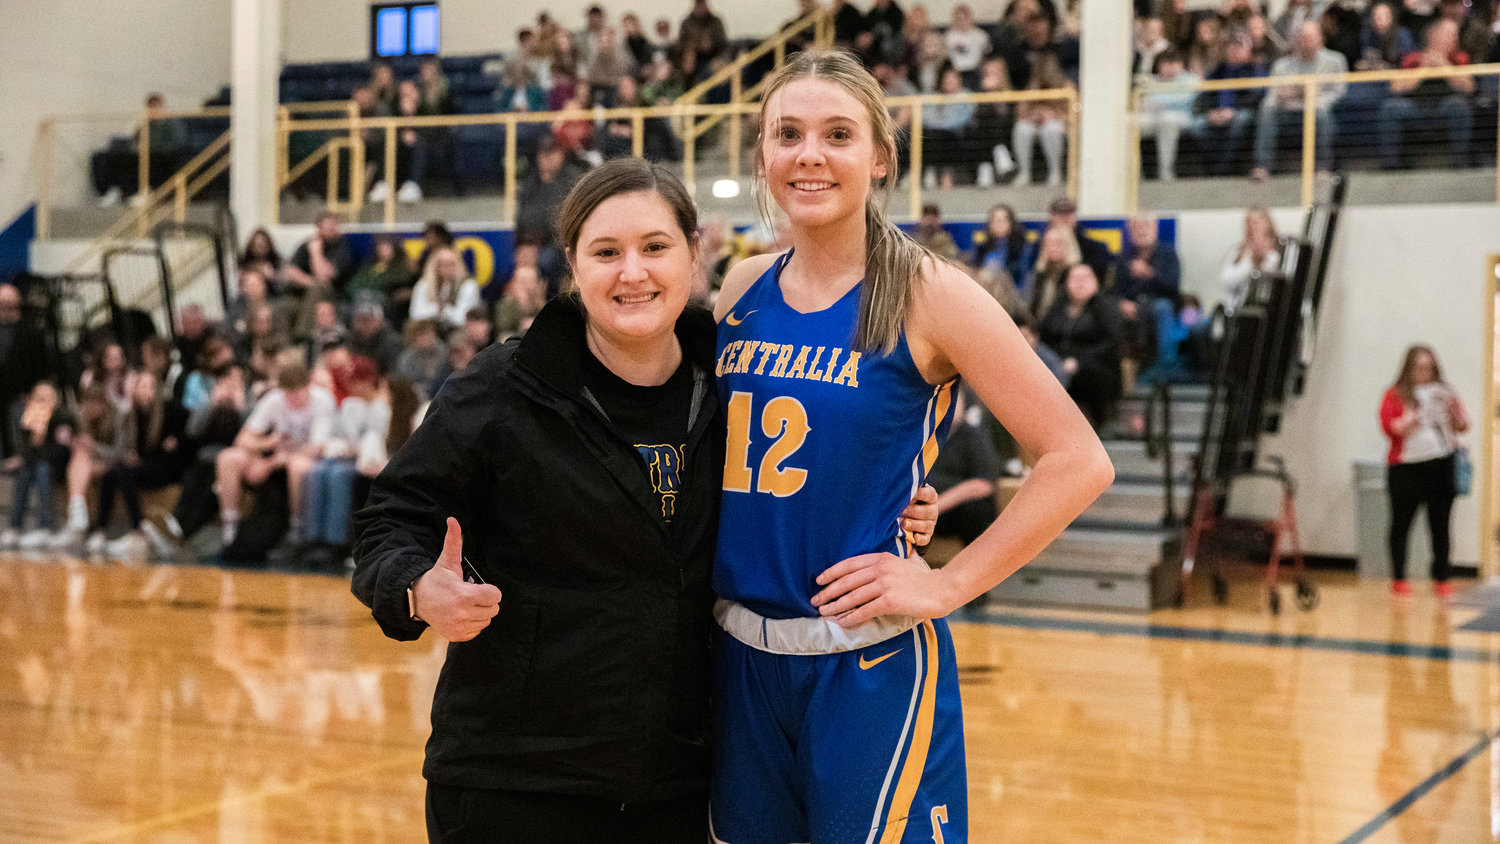 Tumwater’s Kylie Waltermeyer poses for a photo with Tiffany Twiddy after taking first place in a three-point competition during a Southwest Washington High School All-Star game at Centralia College Friday night.